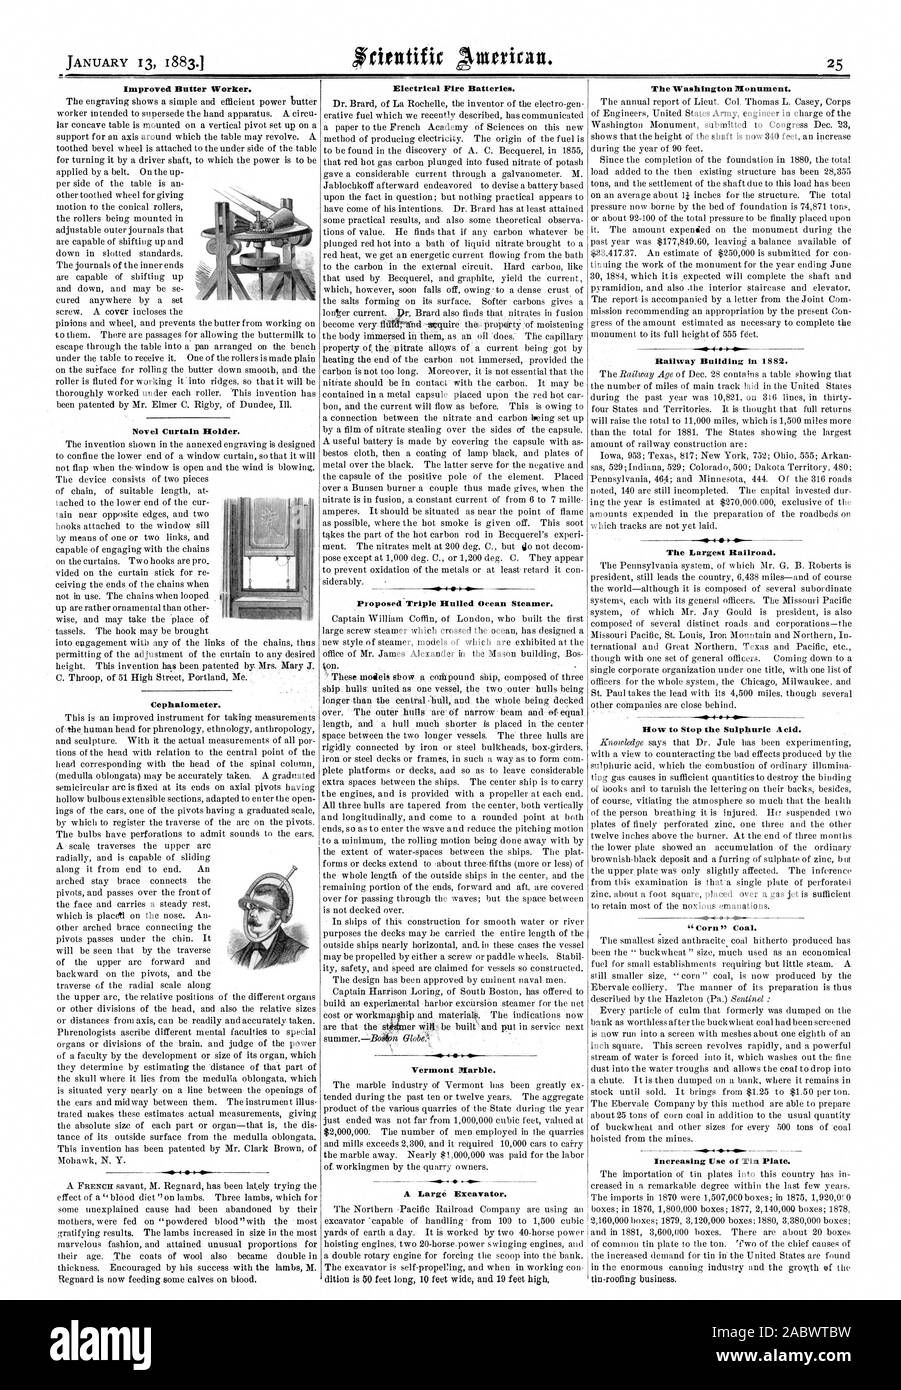 Improved Butter Worker. Novel Curtain Holder. Cephaiometer. I .41 Electrical Fire Batteries. Vermont Marble. A Large Excavator. The Washington Monument. Railway Building in 1882. The Largest Railroad. How to Stop the Sulphuric A cid. Increasing Use of Tin Plate., scientific american, 1883-01-13 Stock Photo